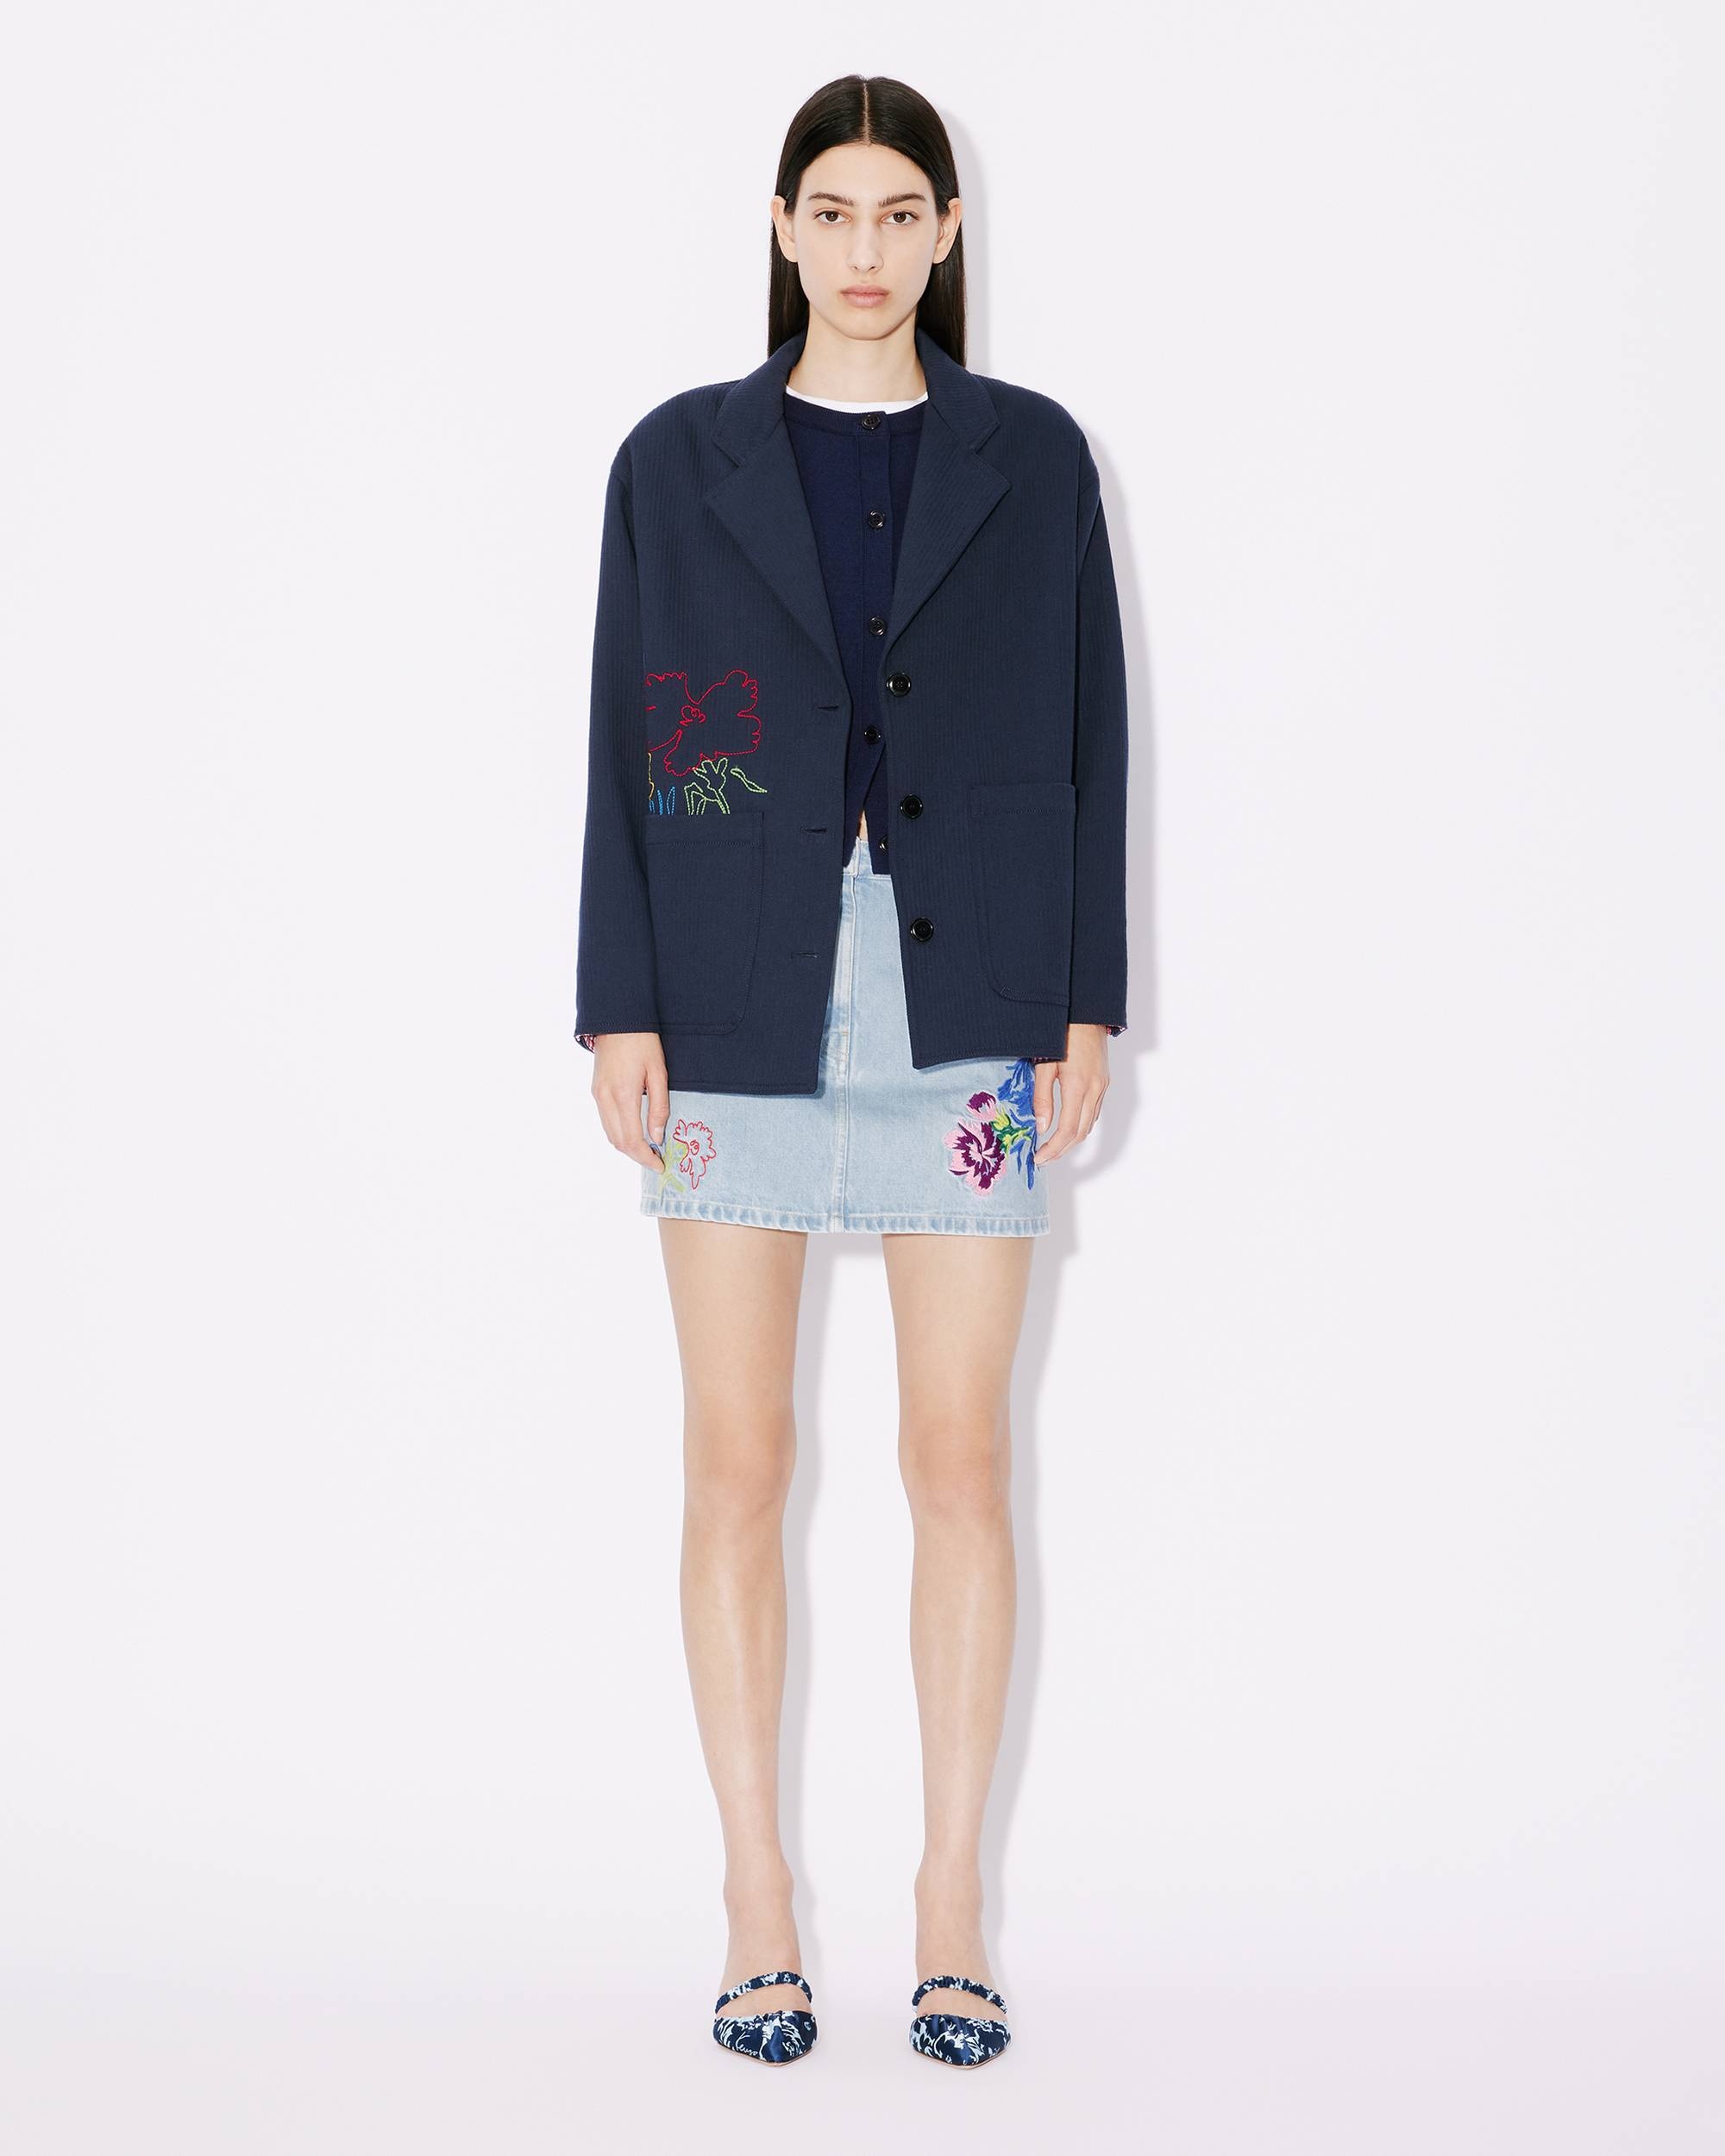 'KENZO Drawn Flowers' embroidered cardigan - 7